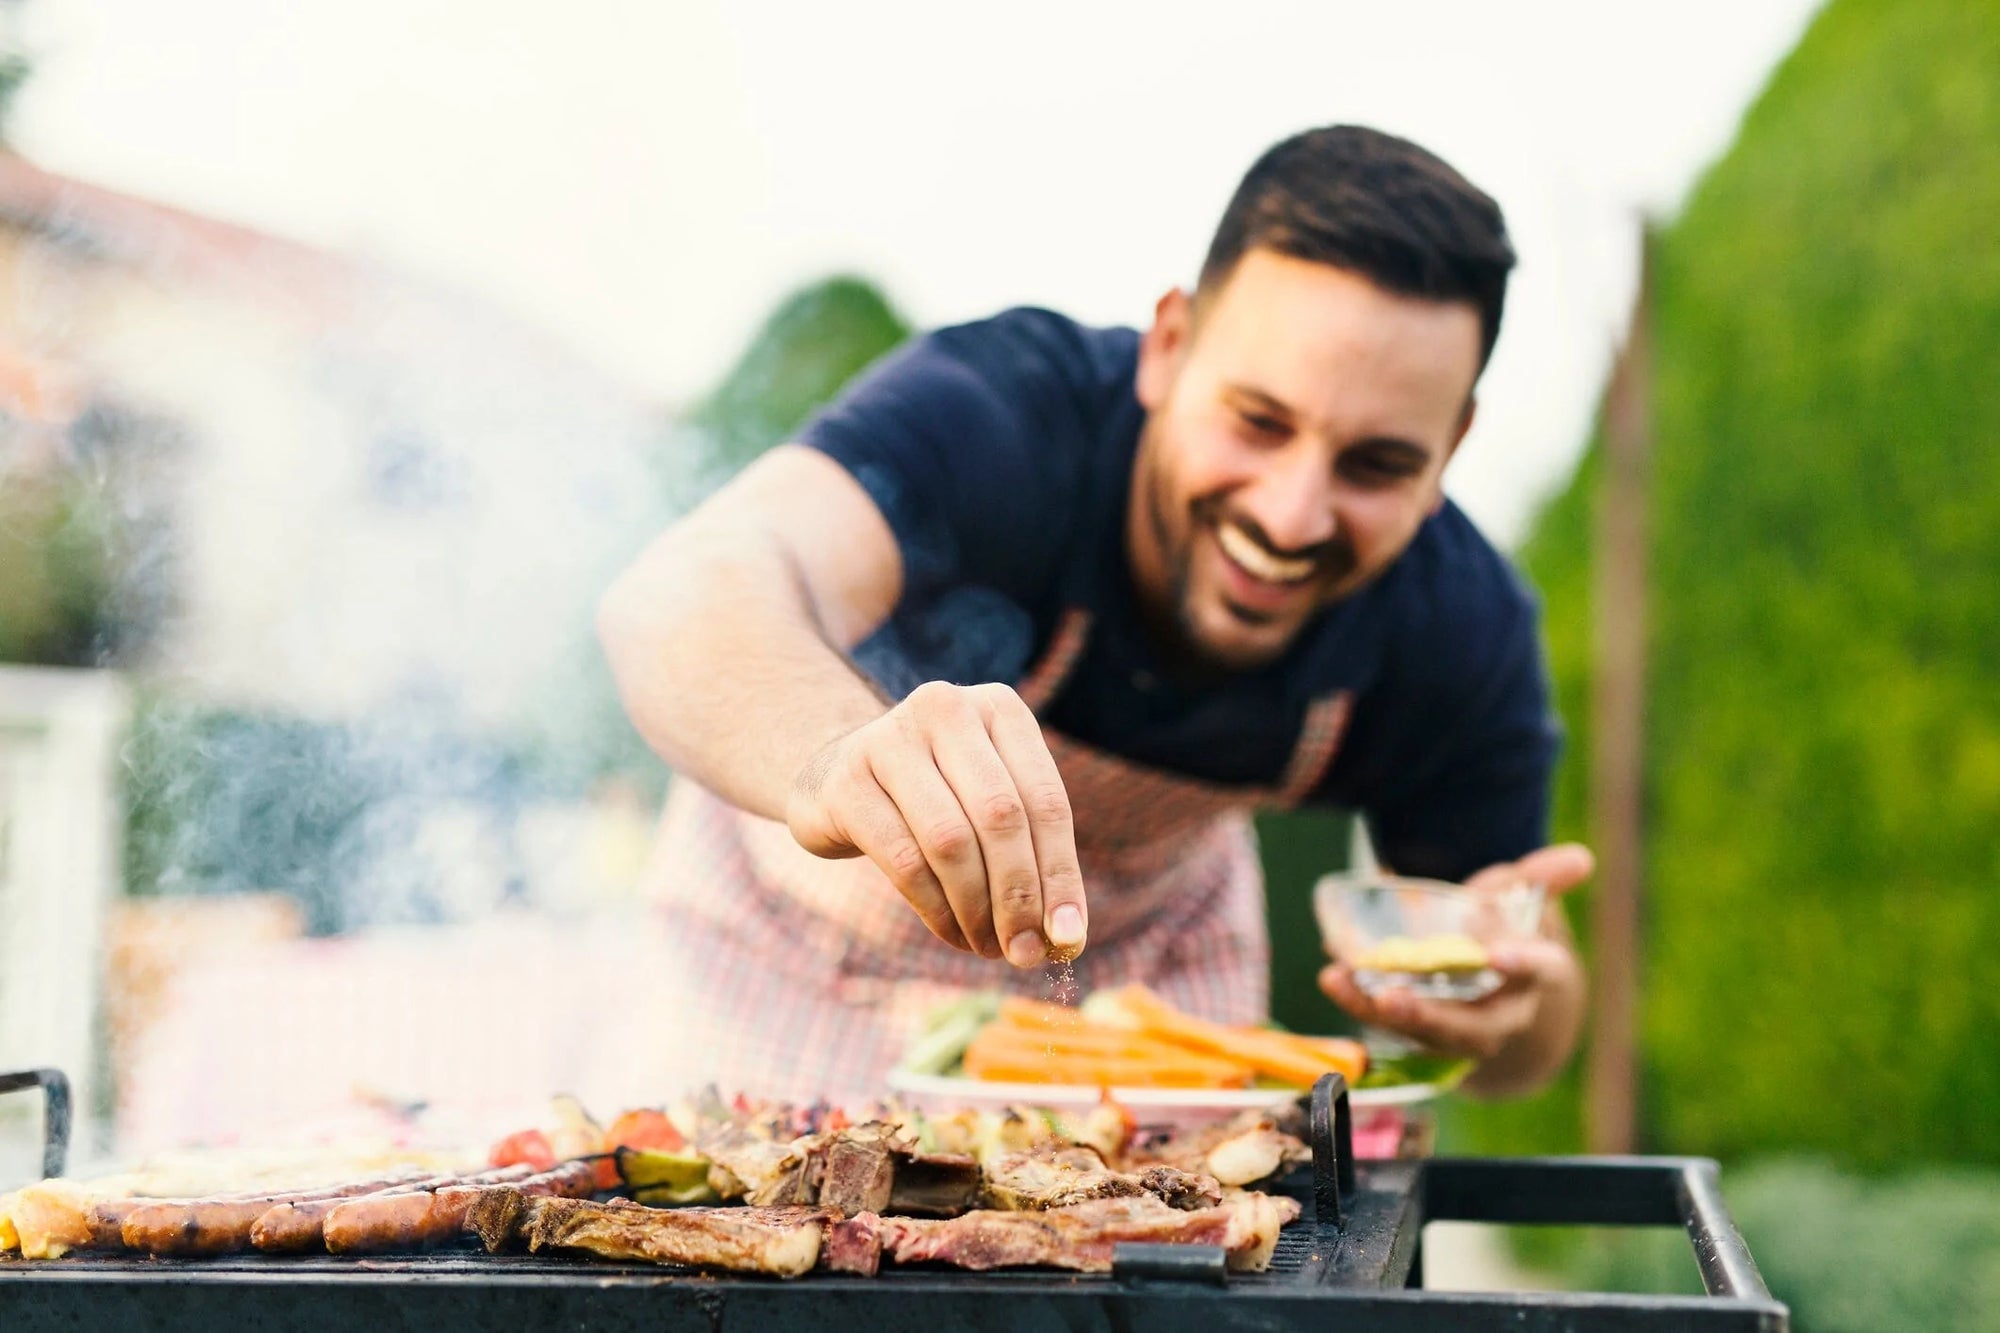 A man barbecuing, happily sprinkling an onion substitute or seasoning onto his grilling meat.